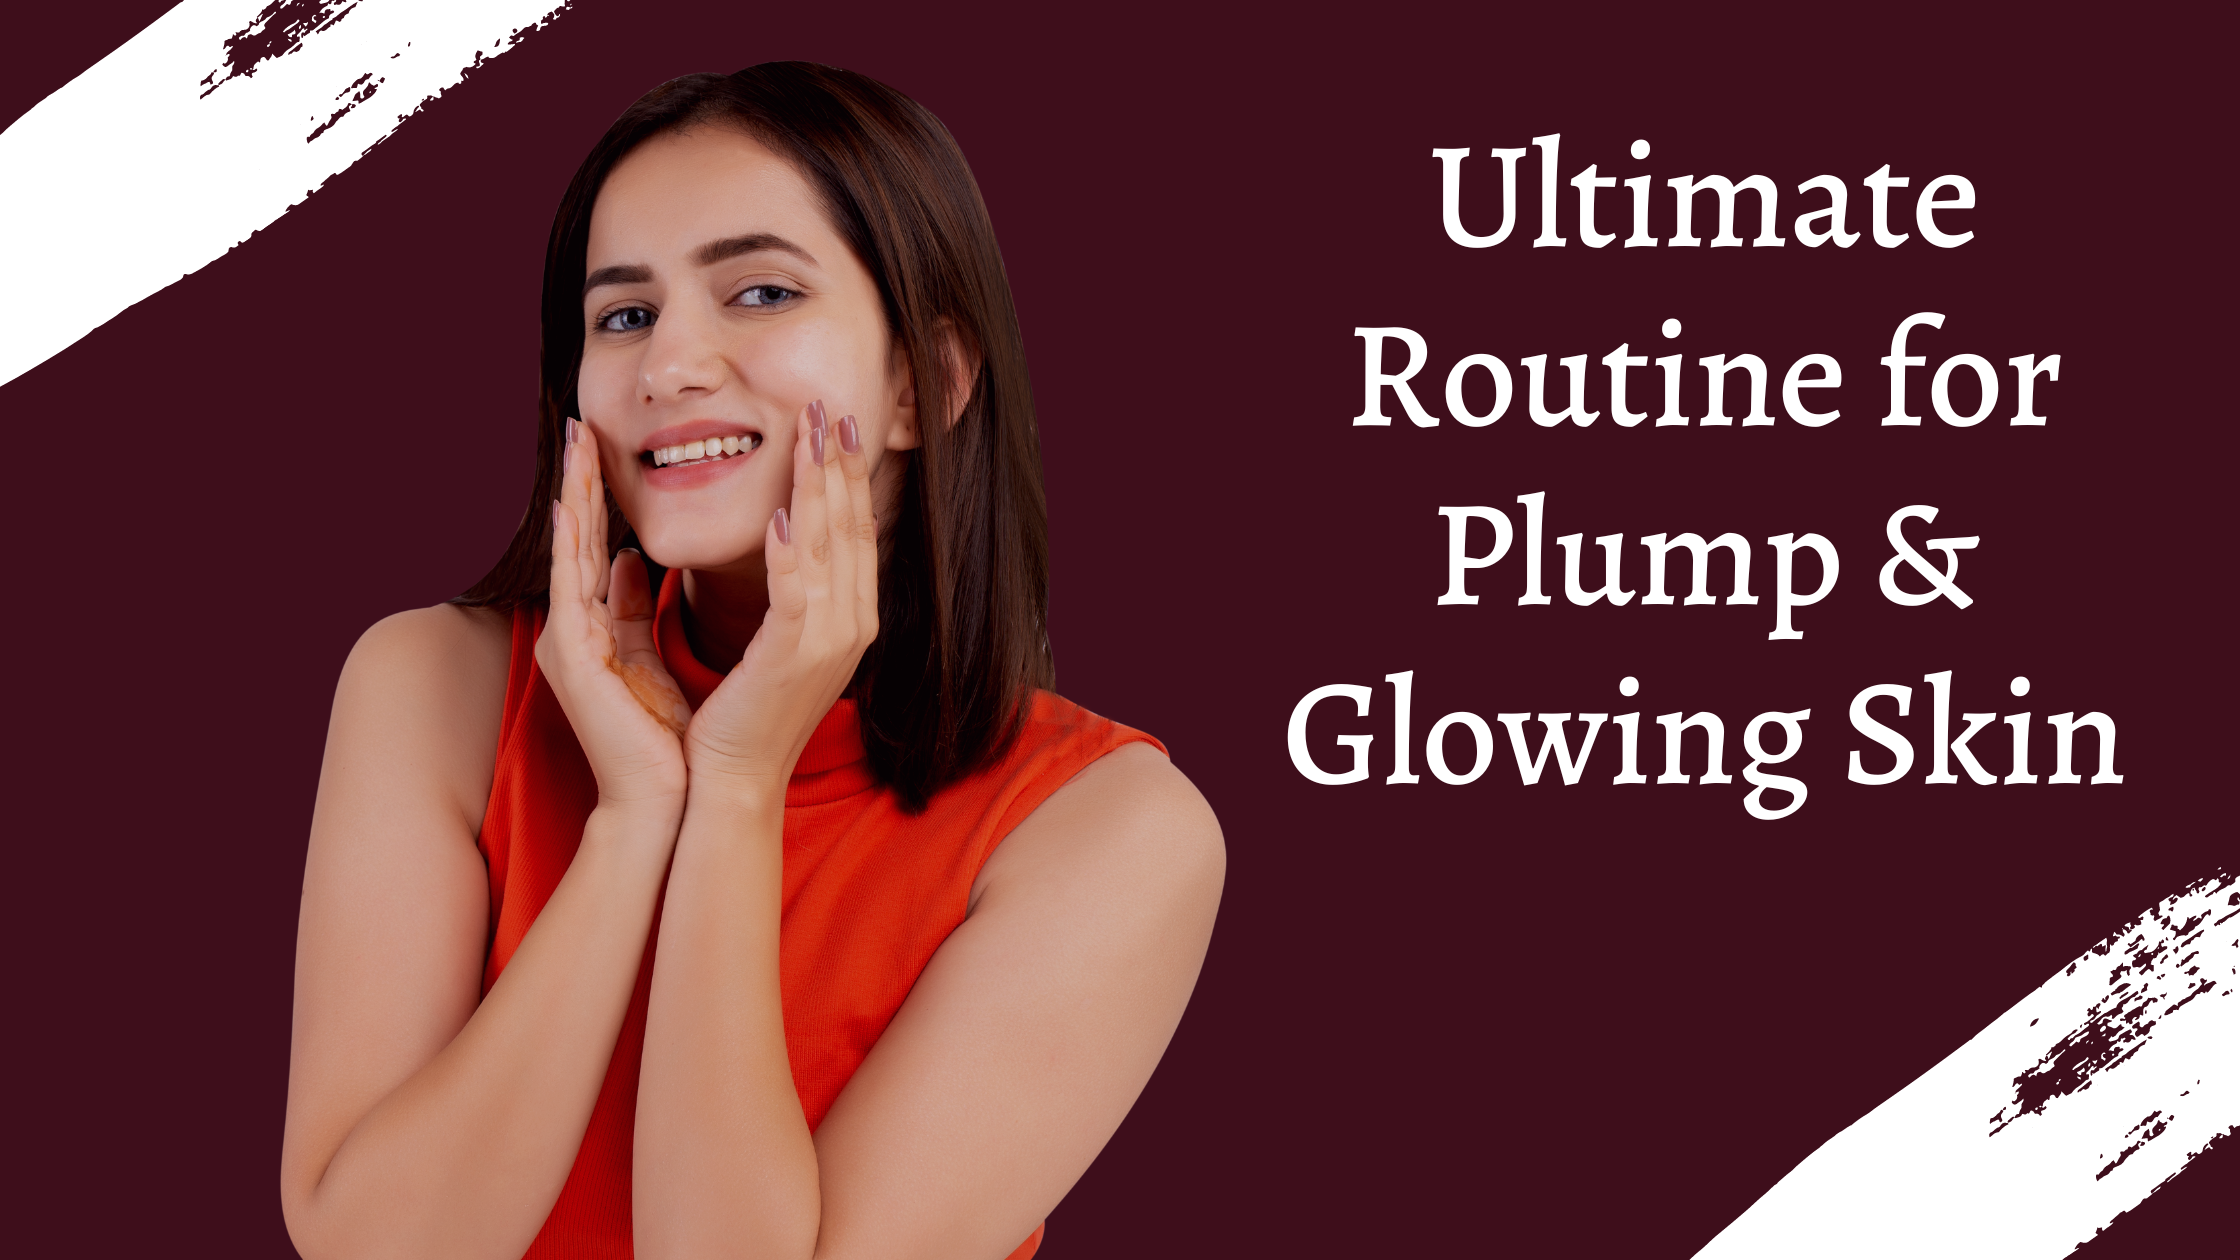 Ultimate Routine for Plump & Glowing Skin